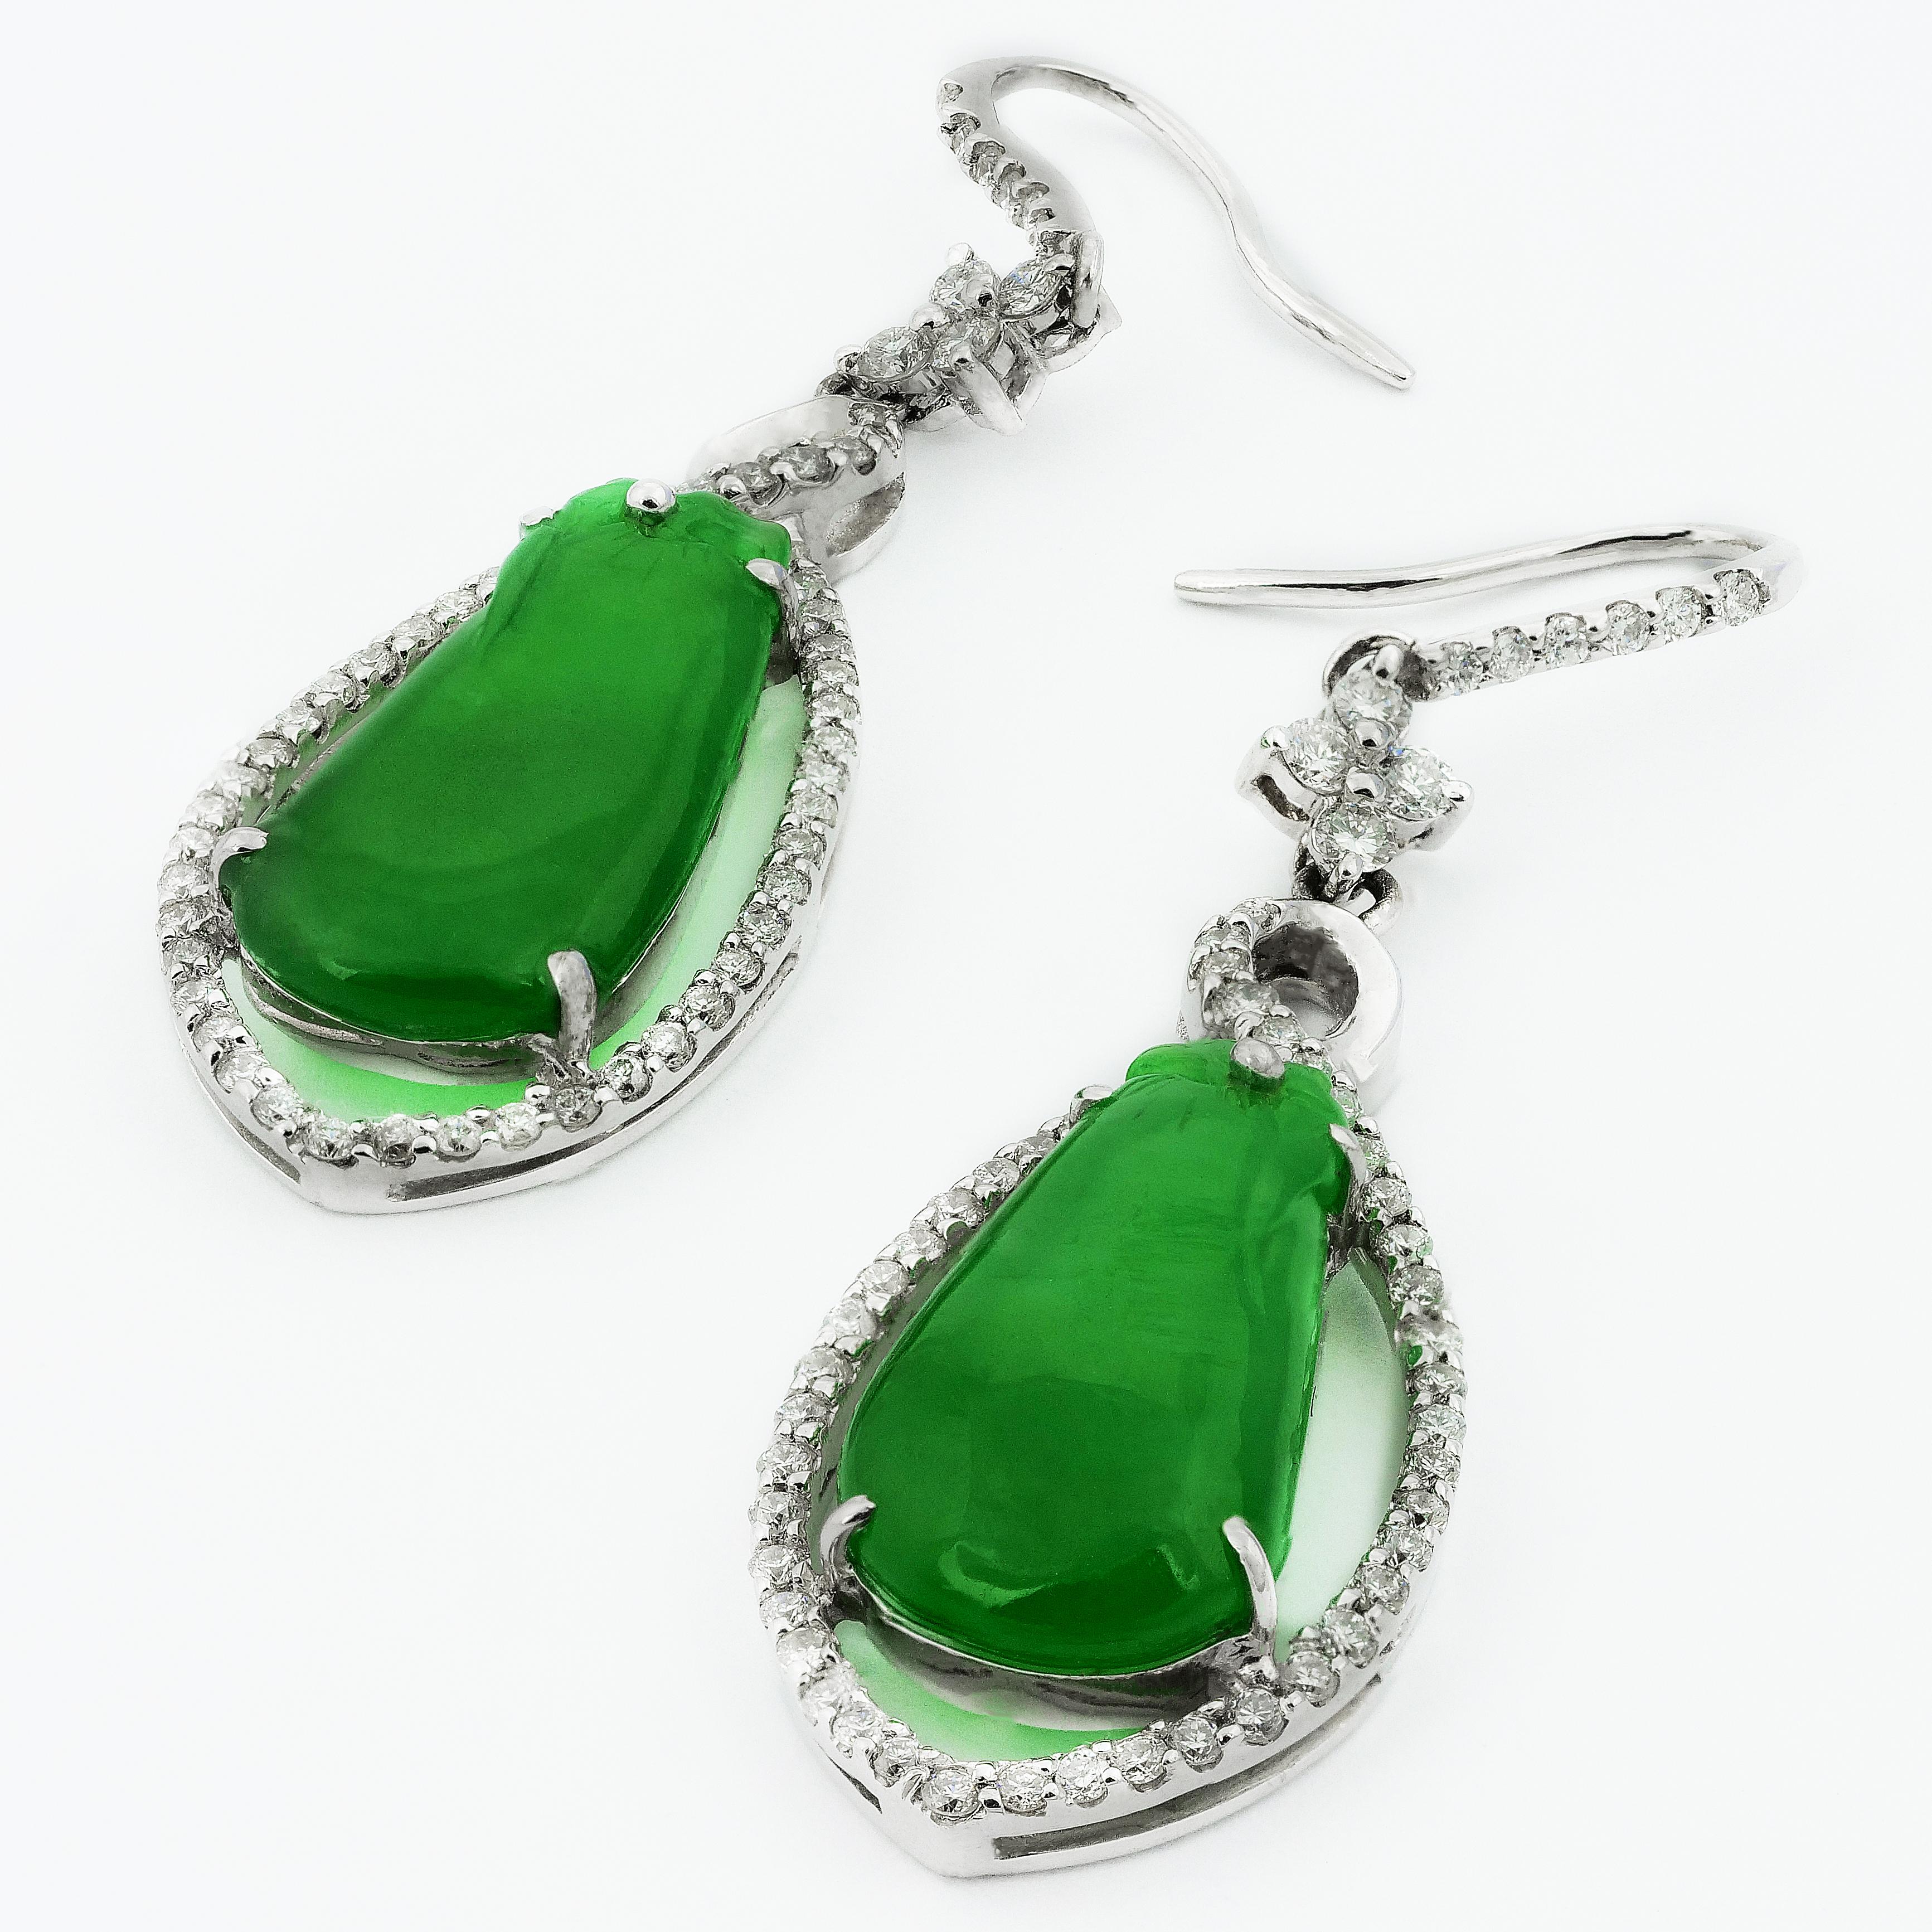 Stunning jade earrings in pear shape dangled by various shapes of crosses, circles and vertical lines all covered in glistening diamonds. The jade is calm and cooling and has a gorgeous sheer glowing sheen on it as well as subtle shades of greens.